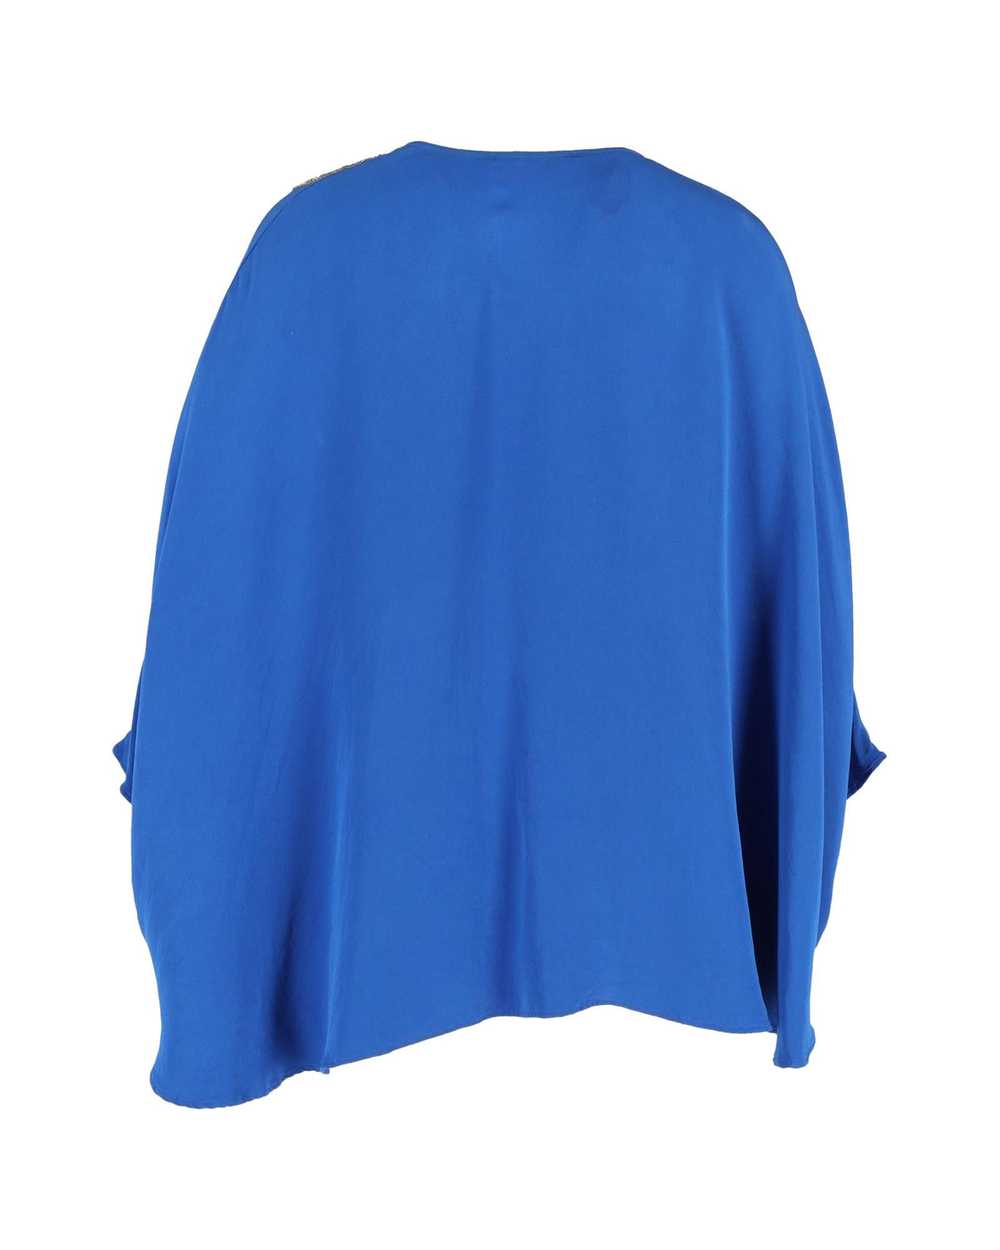 Emilio Pucci Blue Silk Embellished Blouse by Emil… - image 3